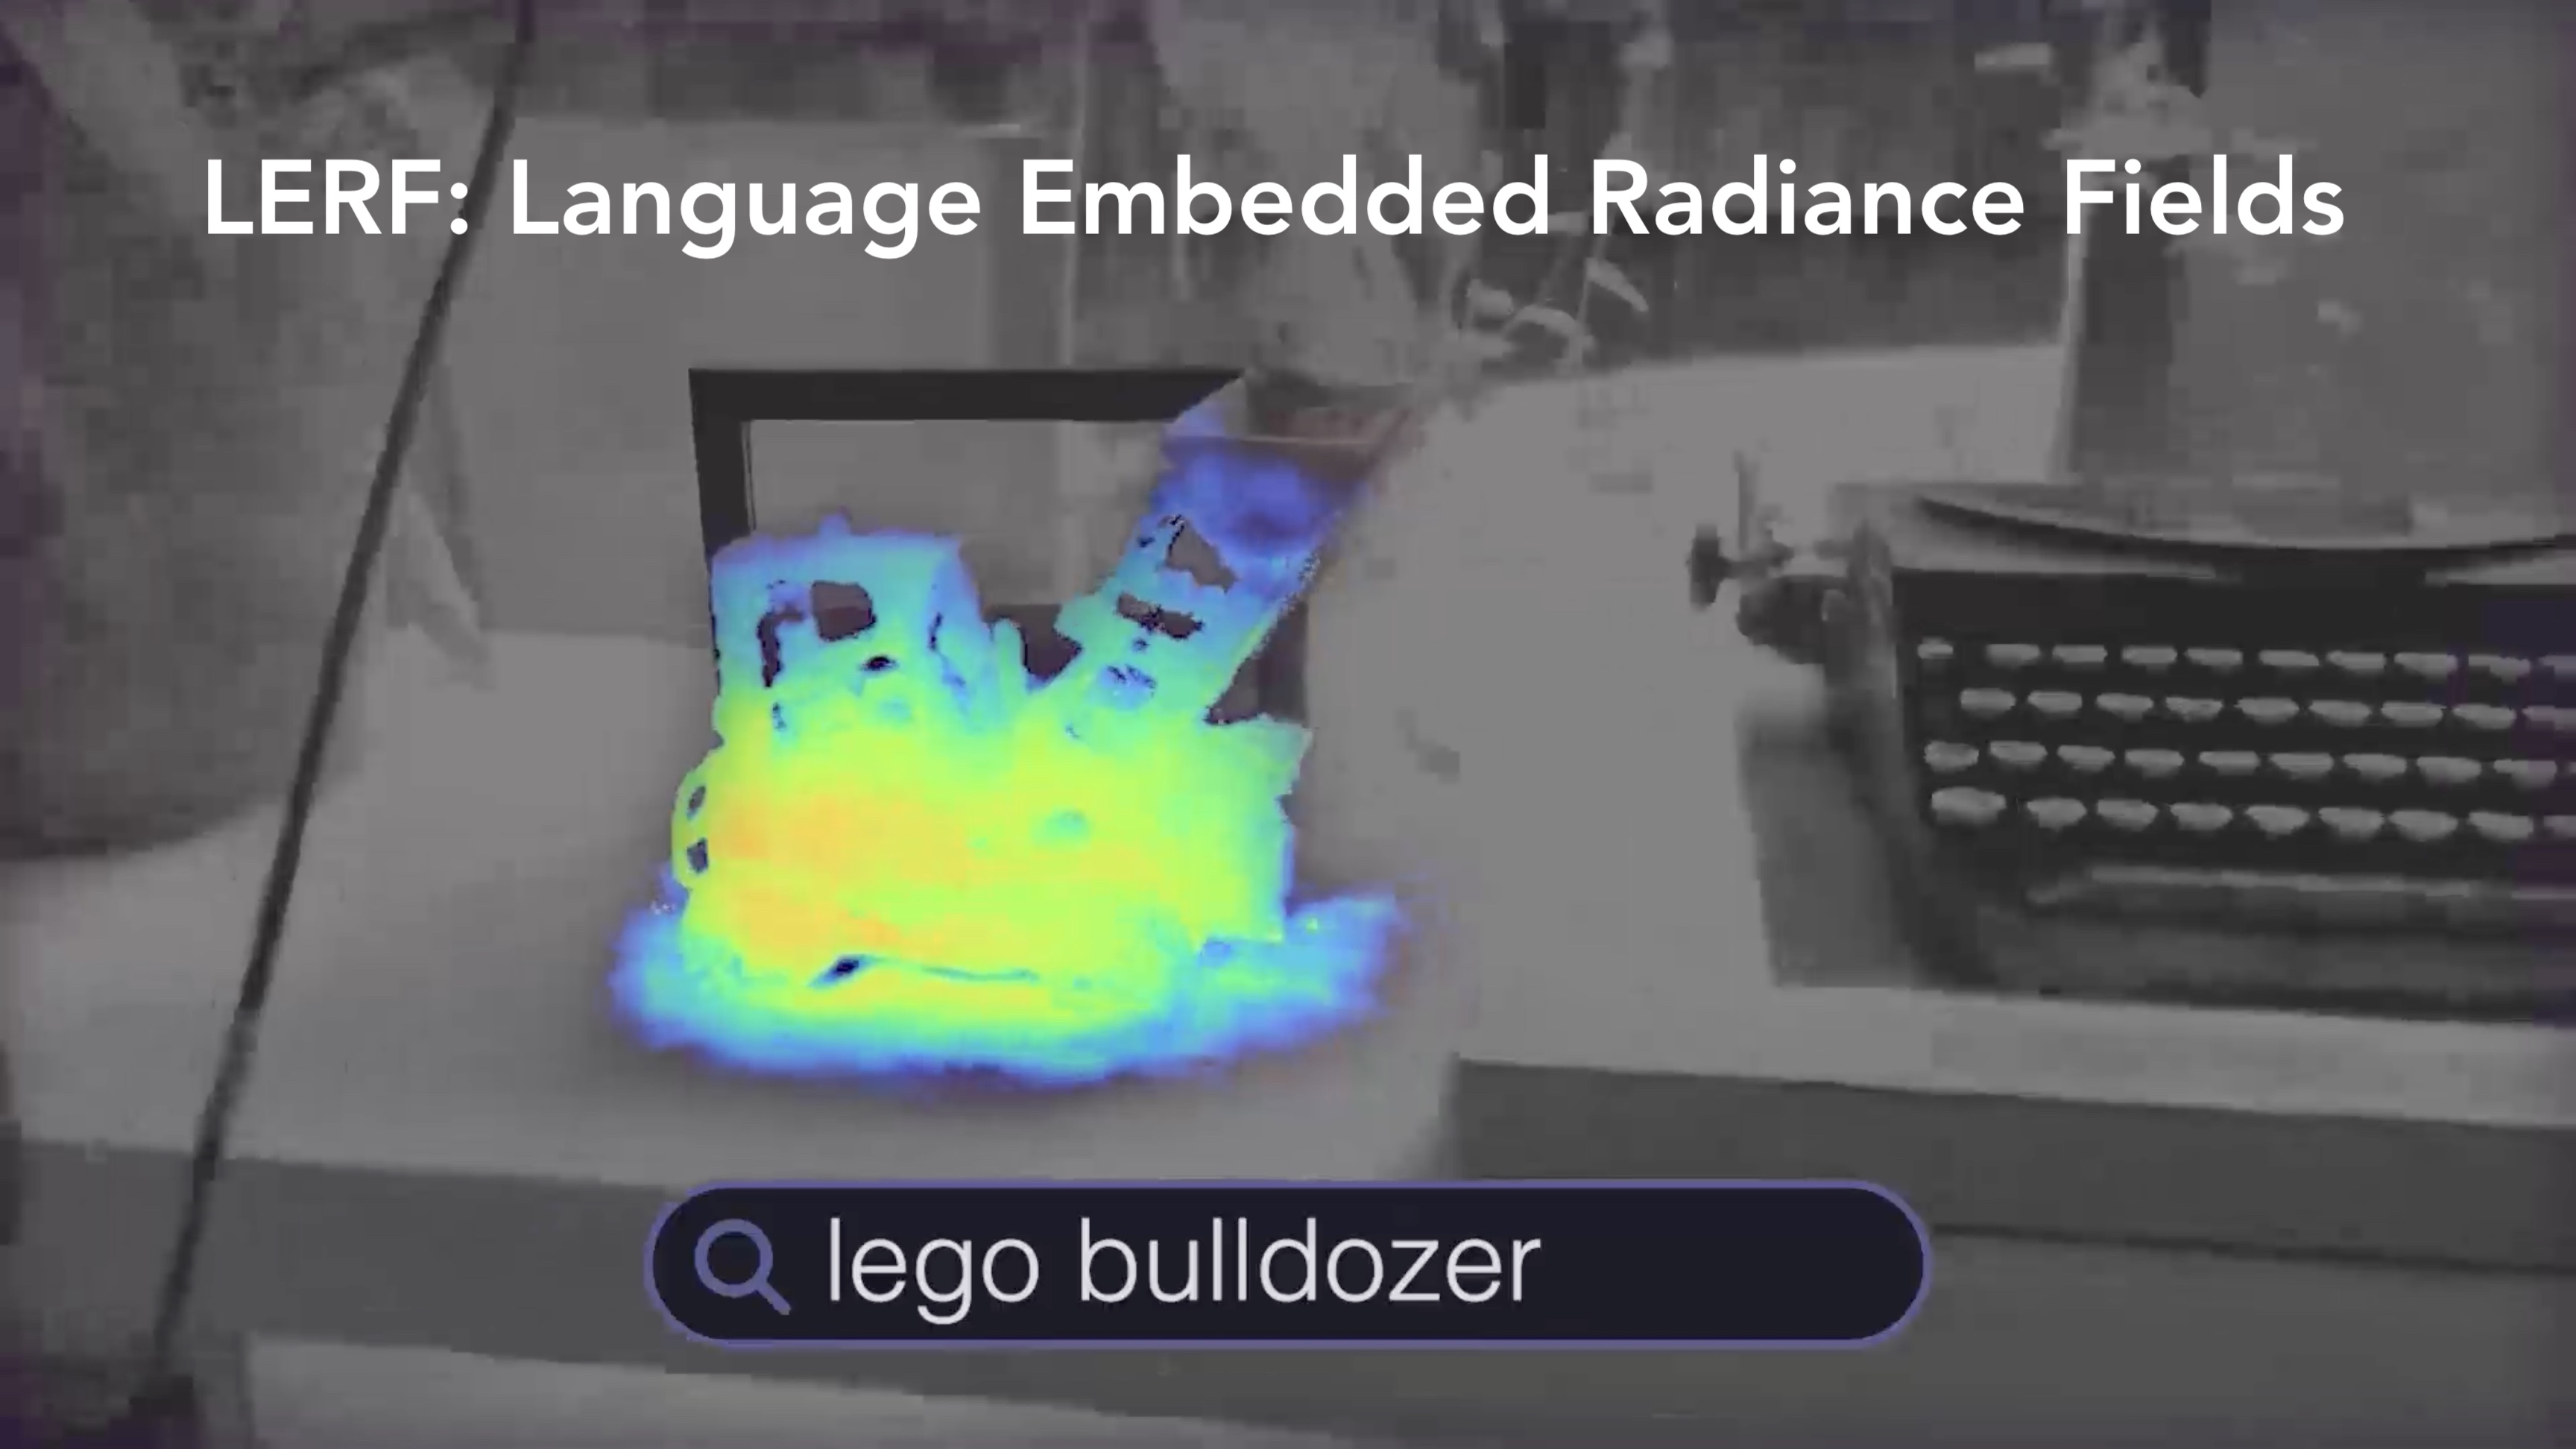                                           LERF optimizes a dense, multi-scale language 3D field by volume rendering CLIP embeddings along             